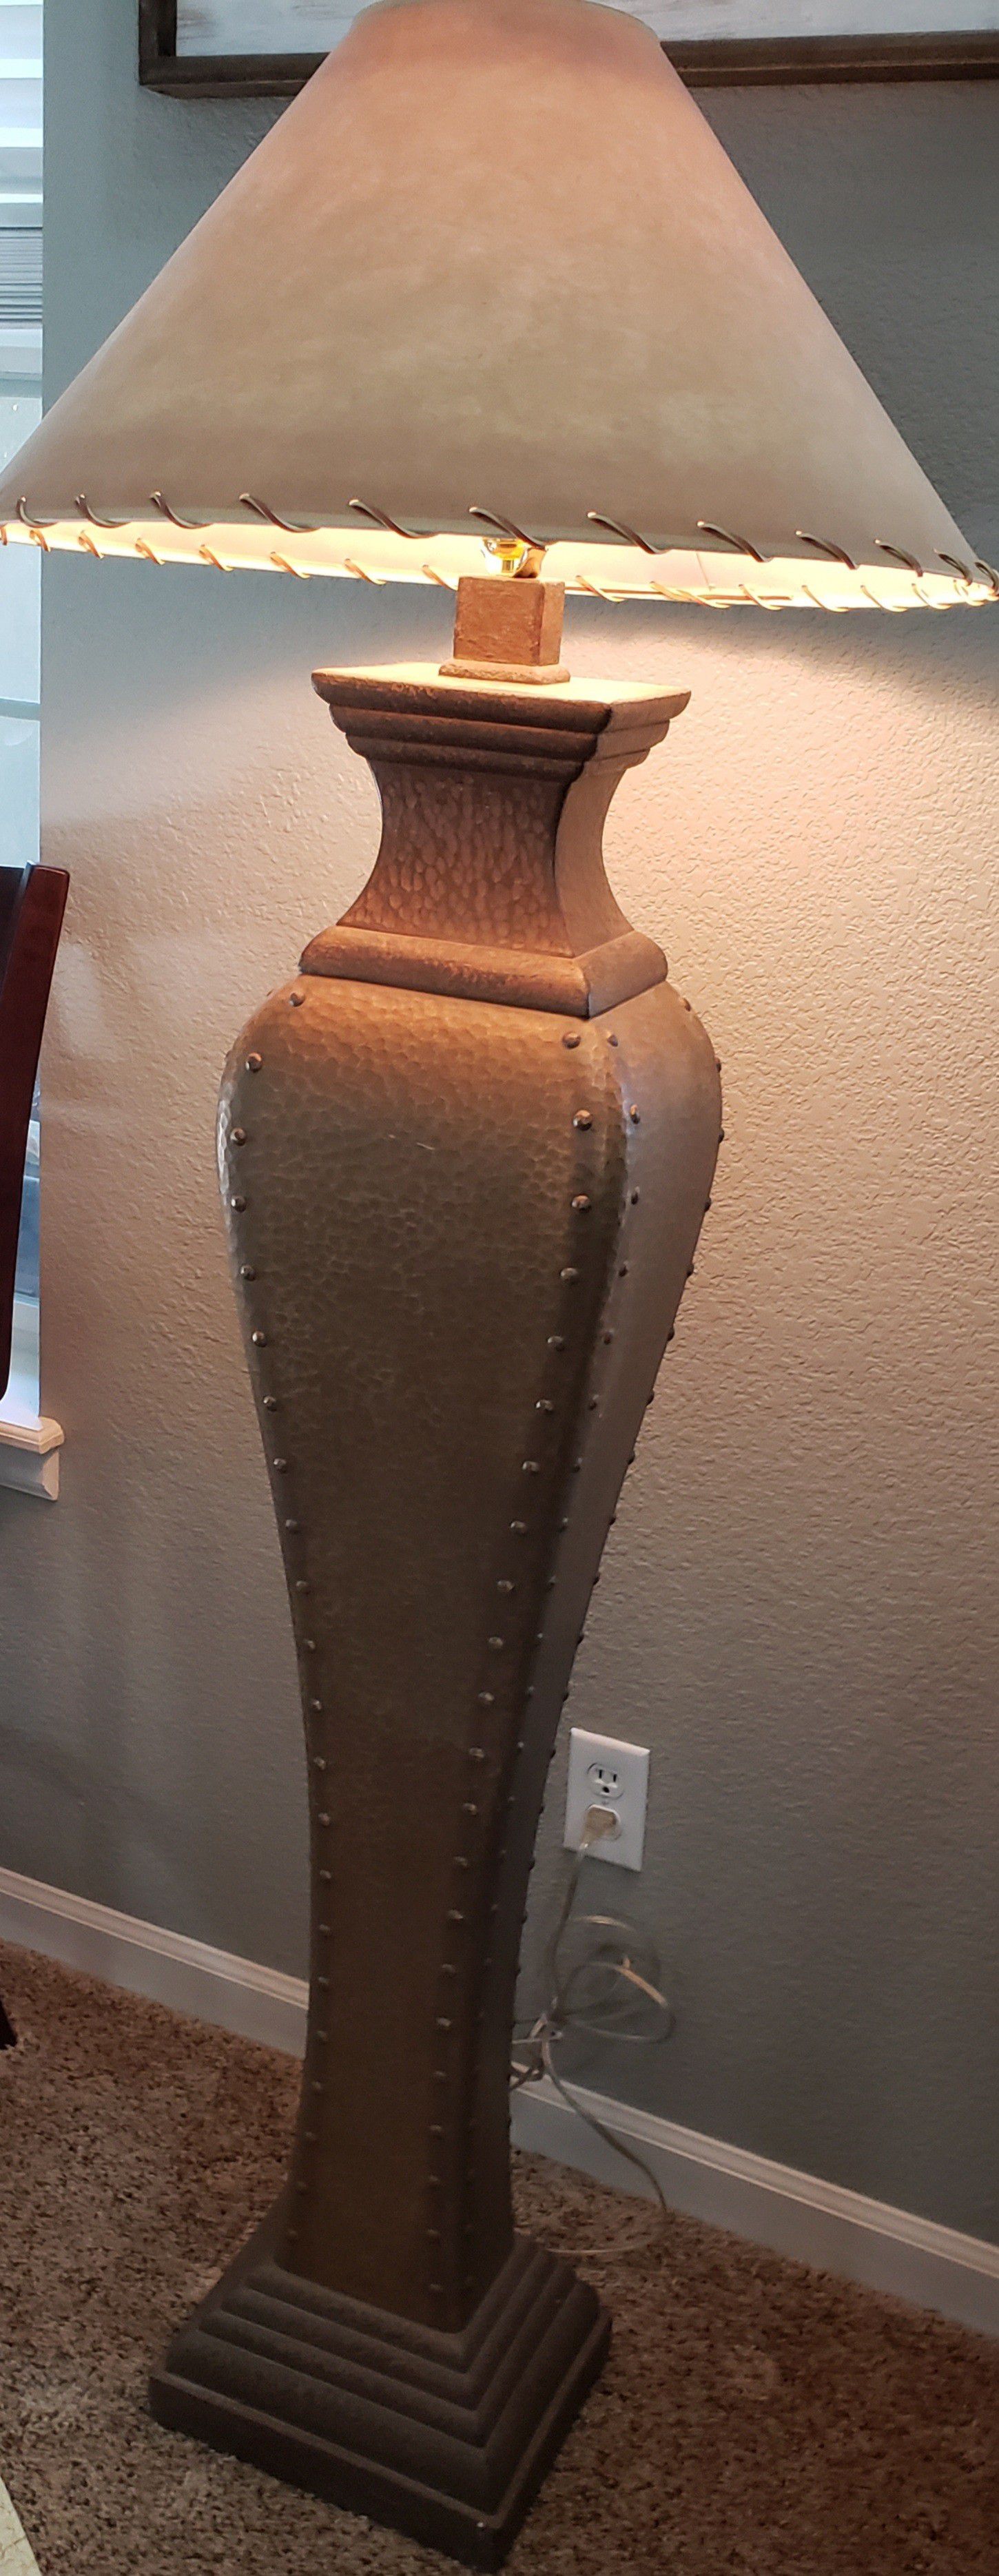 FLOOR DECOR LAMP AND LAMP SHADE 64" height